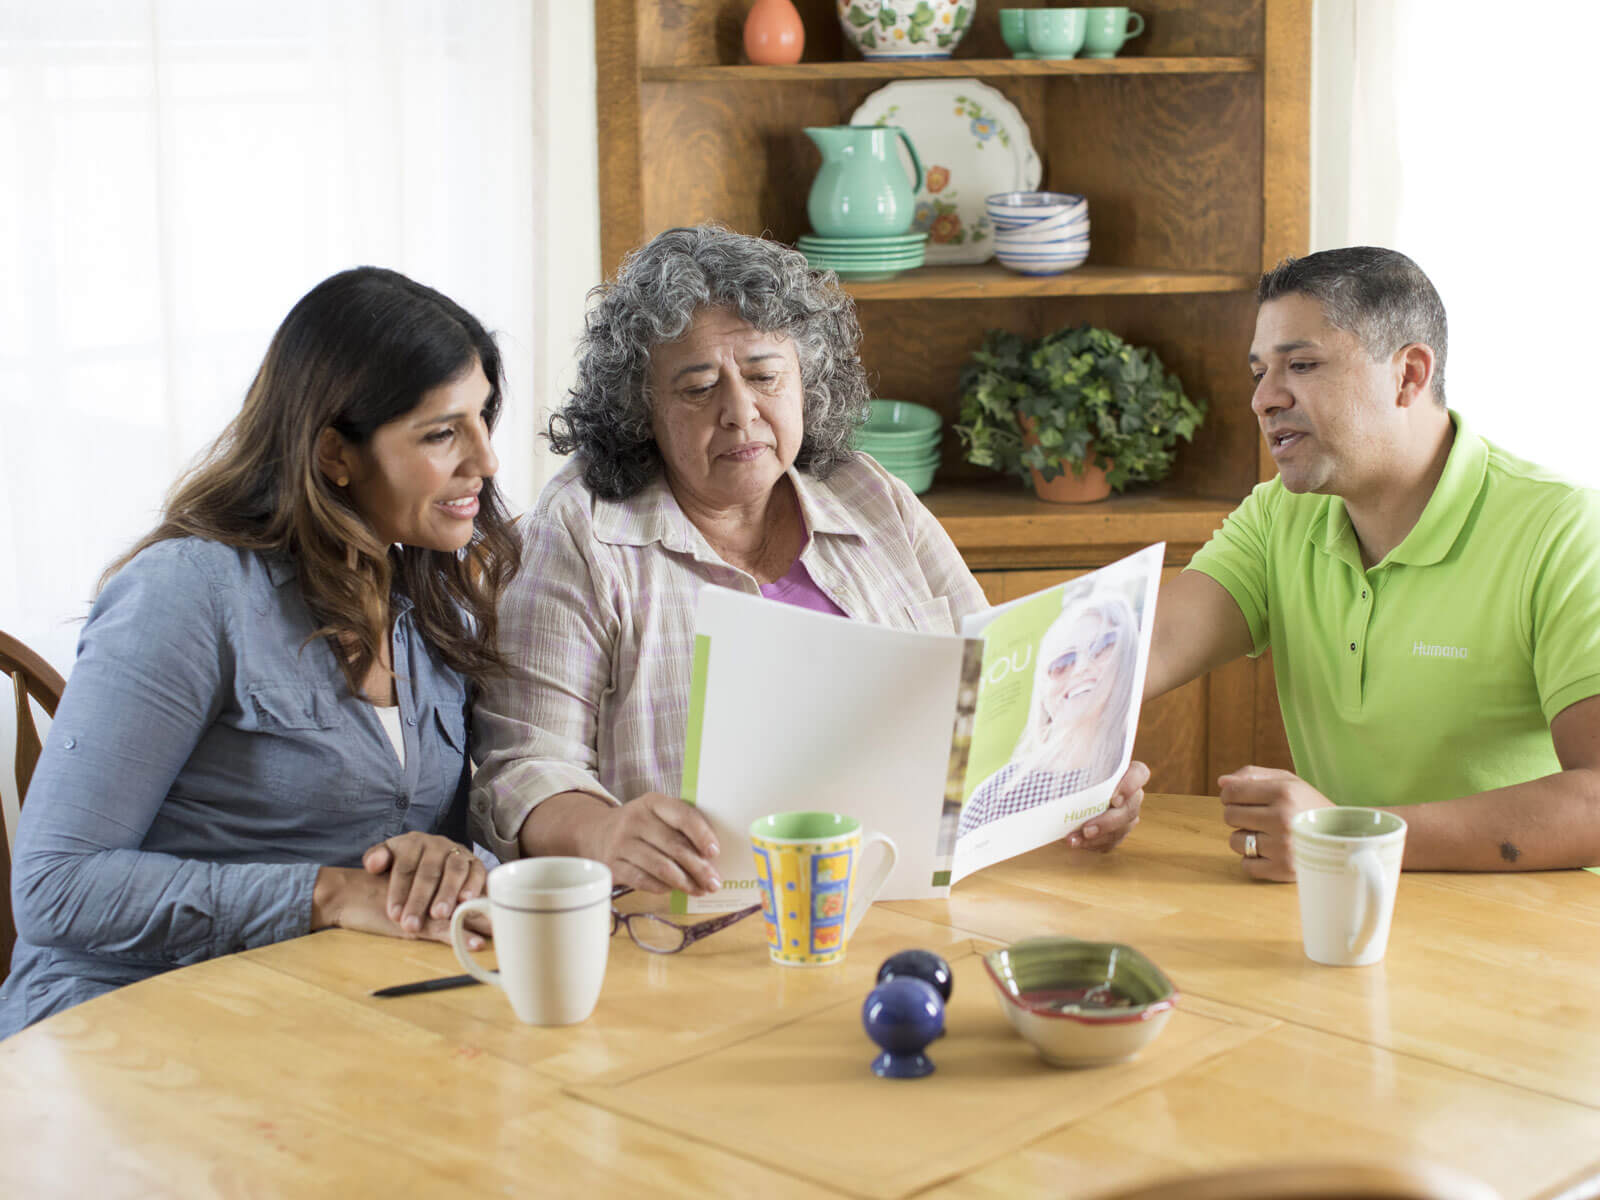 A Humana employee communicates in Spanish to an elderly woman and her daughter as she assists them in understanding a healthcare pamphlet.